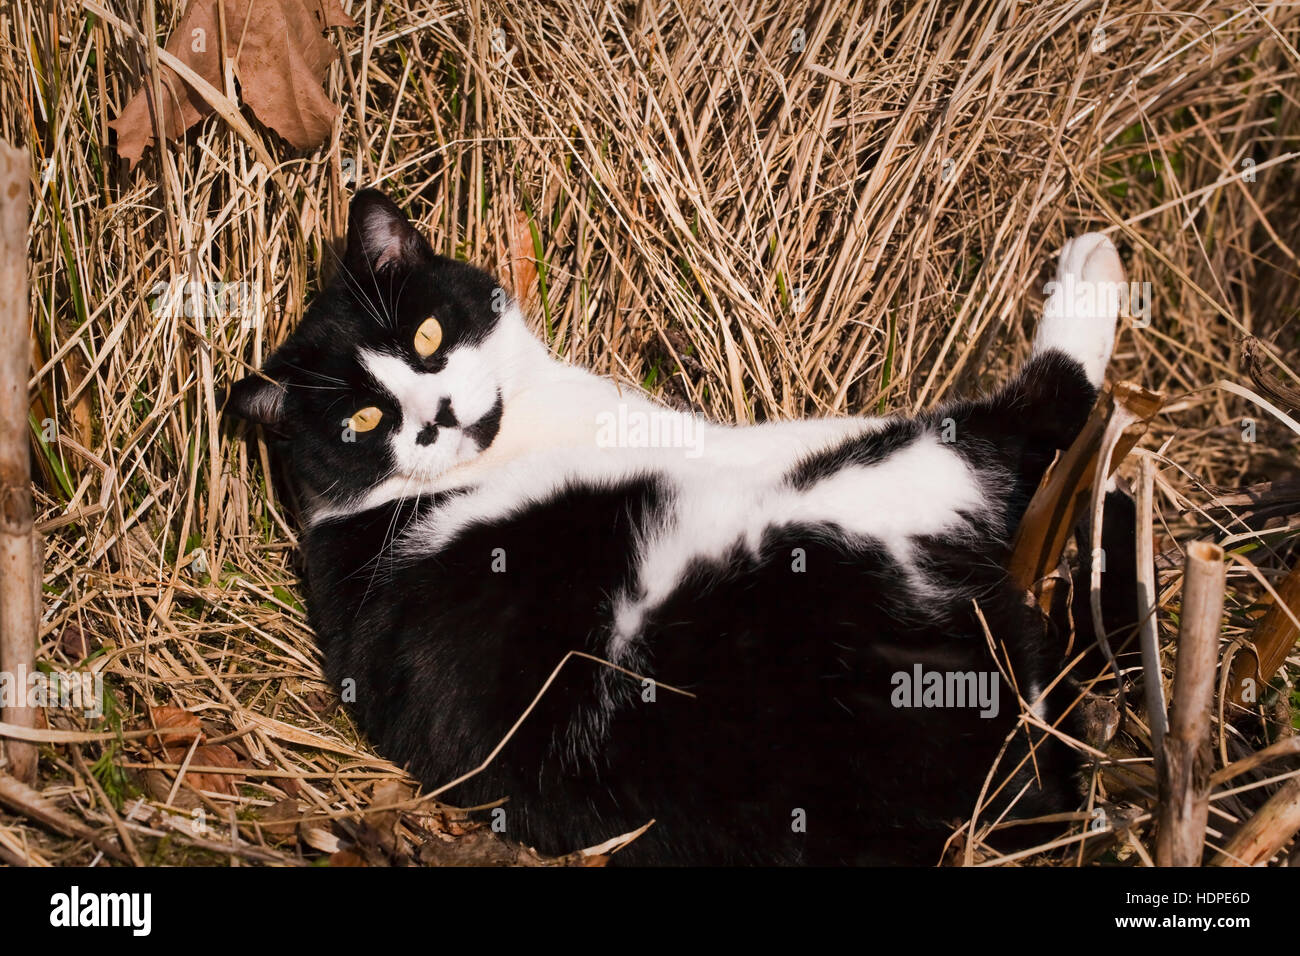 Male, black and white, short-haired, domestic cat with symmetrical markings sunning himself outdoors in a dried grass bed. Stock Photo